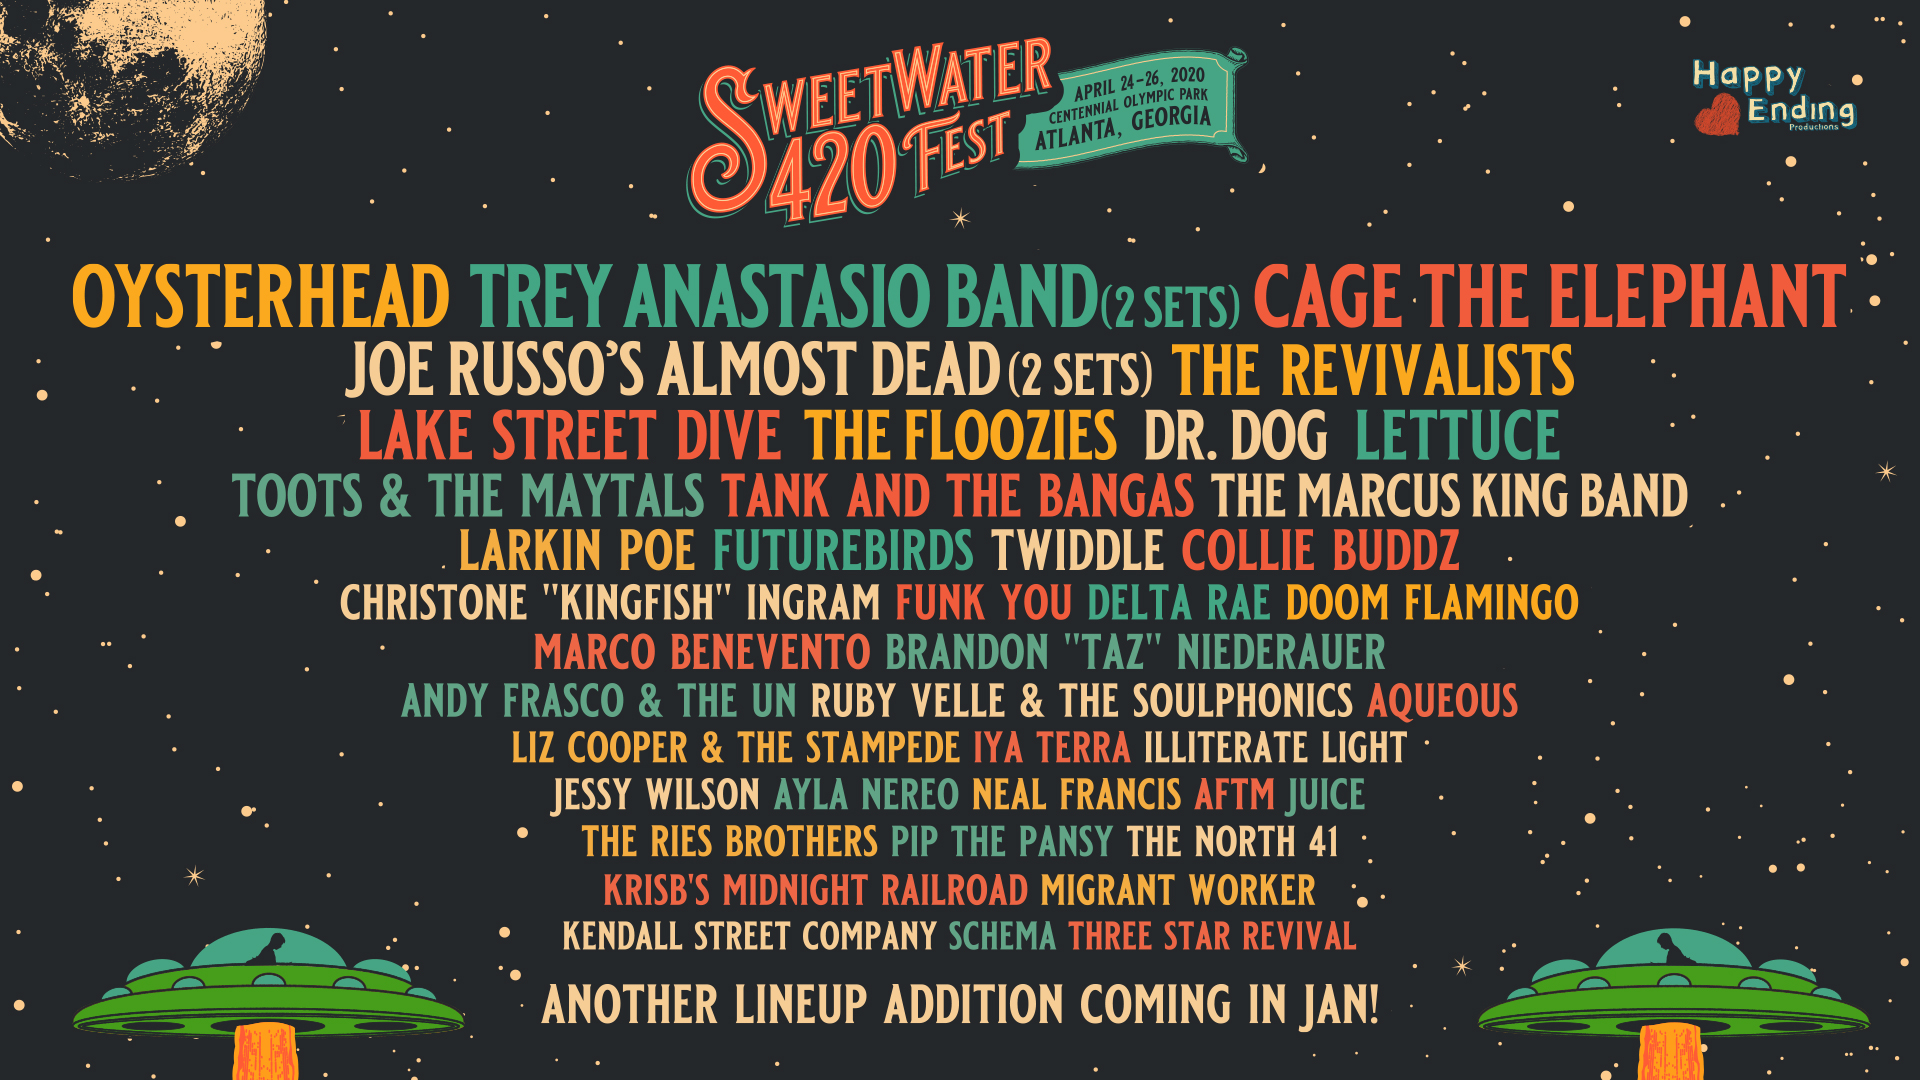 Sweetwater 420 Fest Adds Cage the Elephant to Join Oysterhead & Trey Anastasio Band